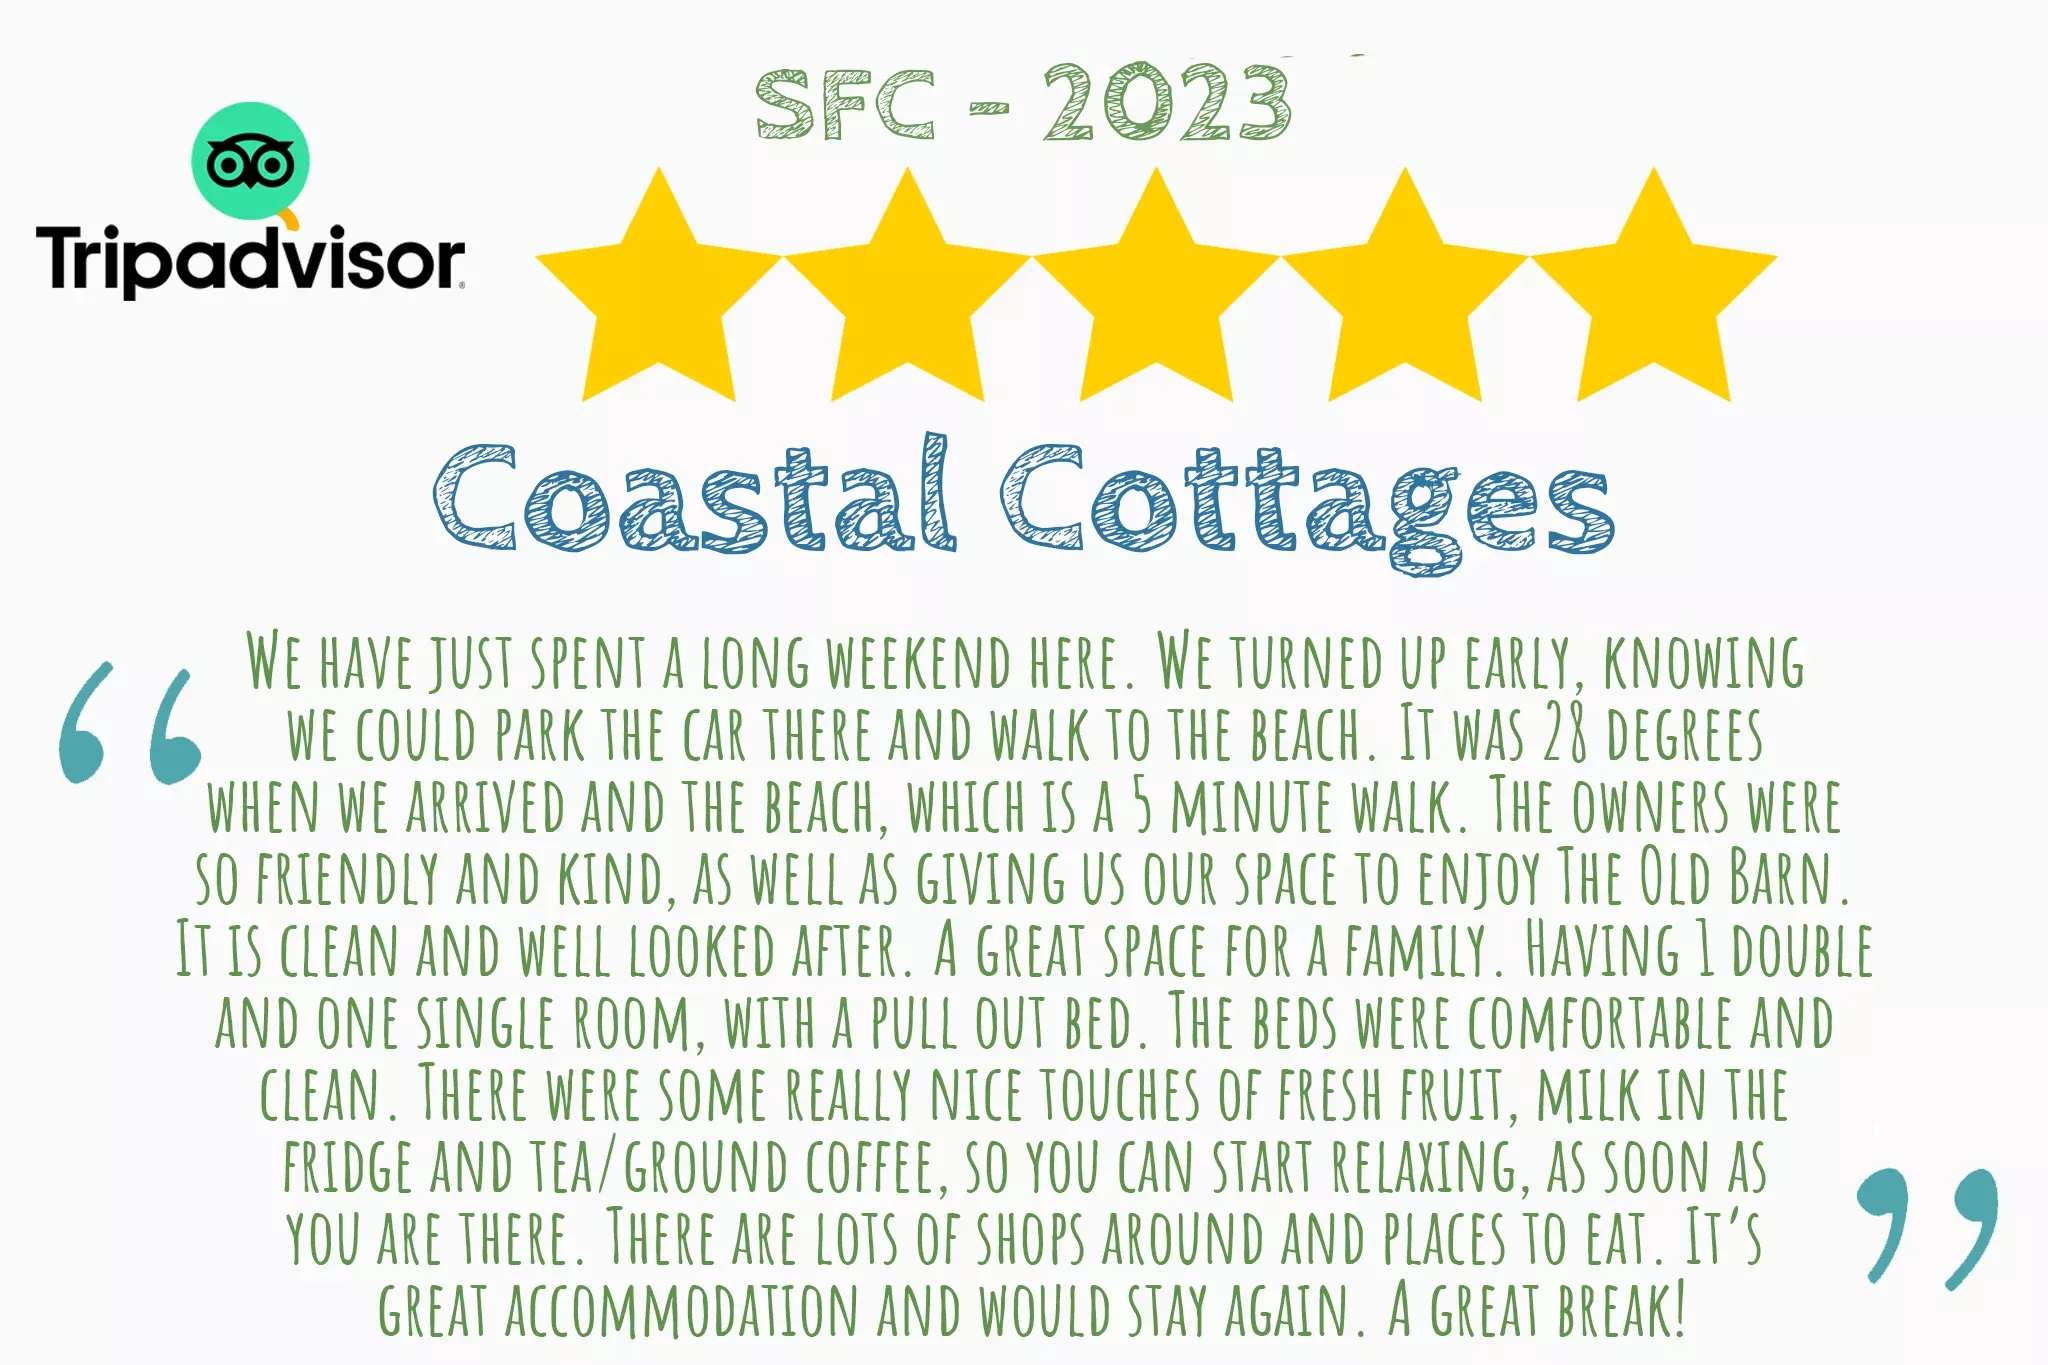 Tripadvisor review from SFC. that says "We have just spent a long weekend here. We turned up early, knowing  we could park the car there and walk to the beach. It was 28 degrees  when we arrived and the beach, which is a 5 minute walk. The owners were  so friendly and kind, as well as giving us our space to enjoy The Old Barn.  It is clean and well looked after. A great space for a family. Having 1 double  and one single room, with a pull out bed. The beds were comfortable and  clean. There were some really nice touches of fresh fruit, milk in the  fridge and tea/ground coffee, so you can start relaxing, as soon as  you are there. There are lots of shops around and places to eat. It’s  great accommodation and would stay again. A great break!"